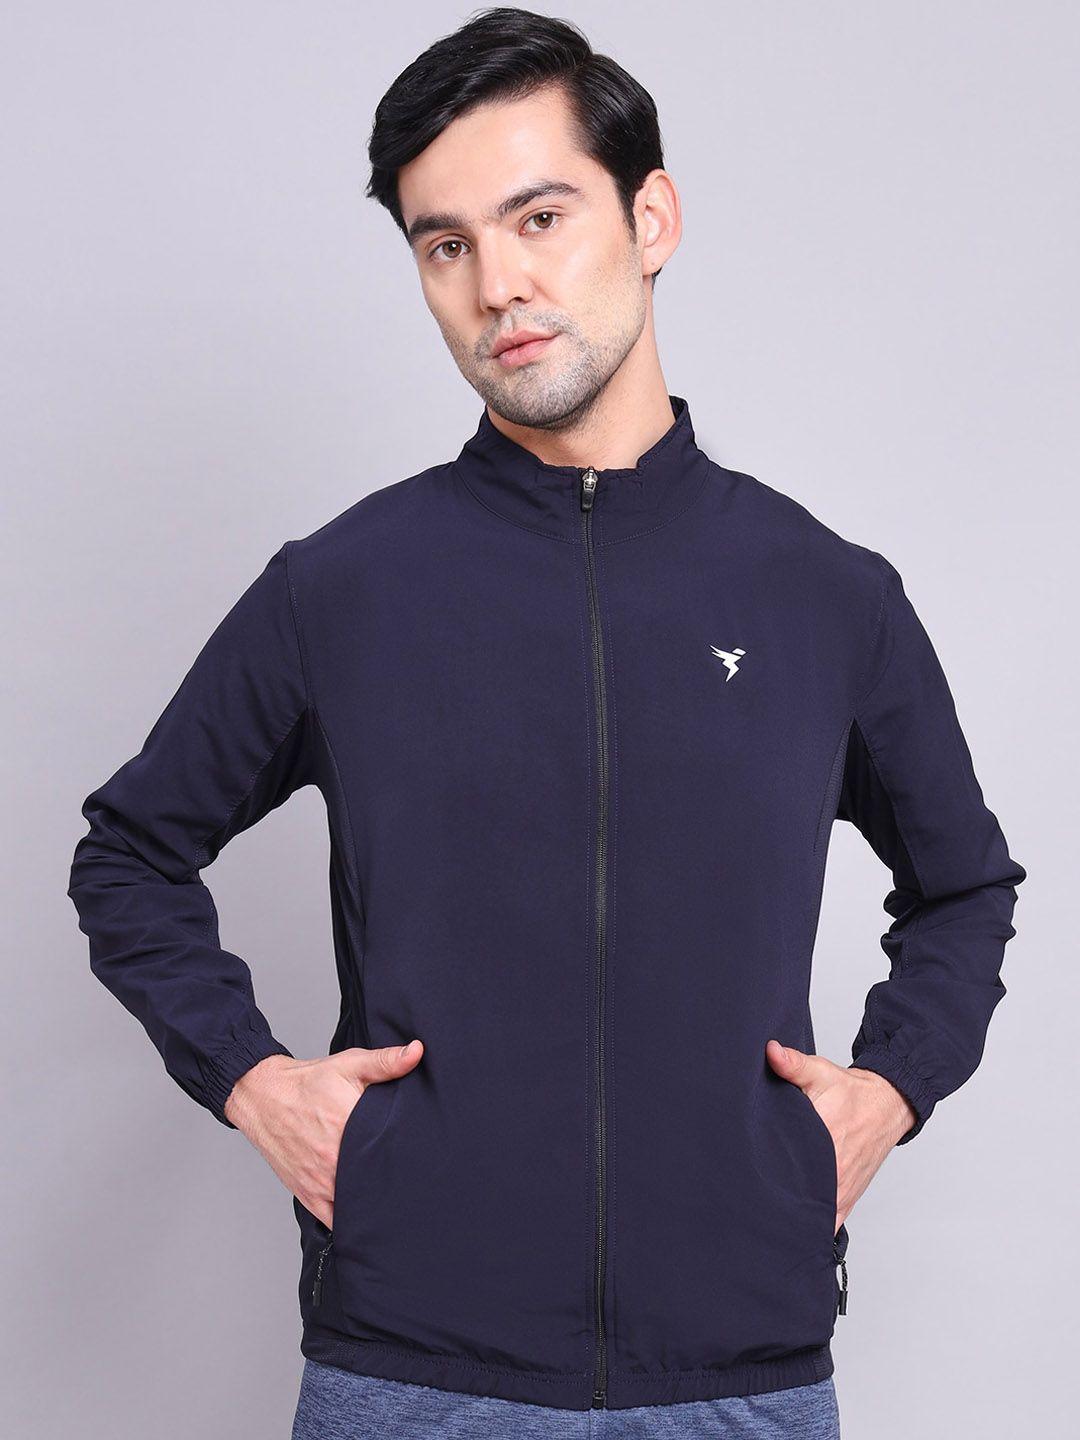 technosport men navy blue camouflage striped lightweight antimicrobial crop training or gym sporty jacket